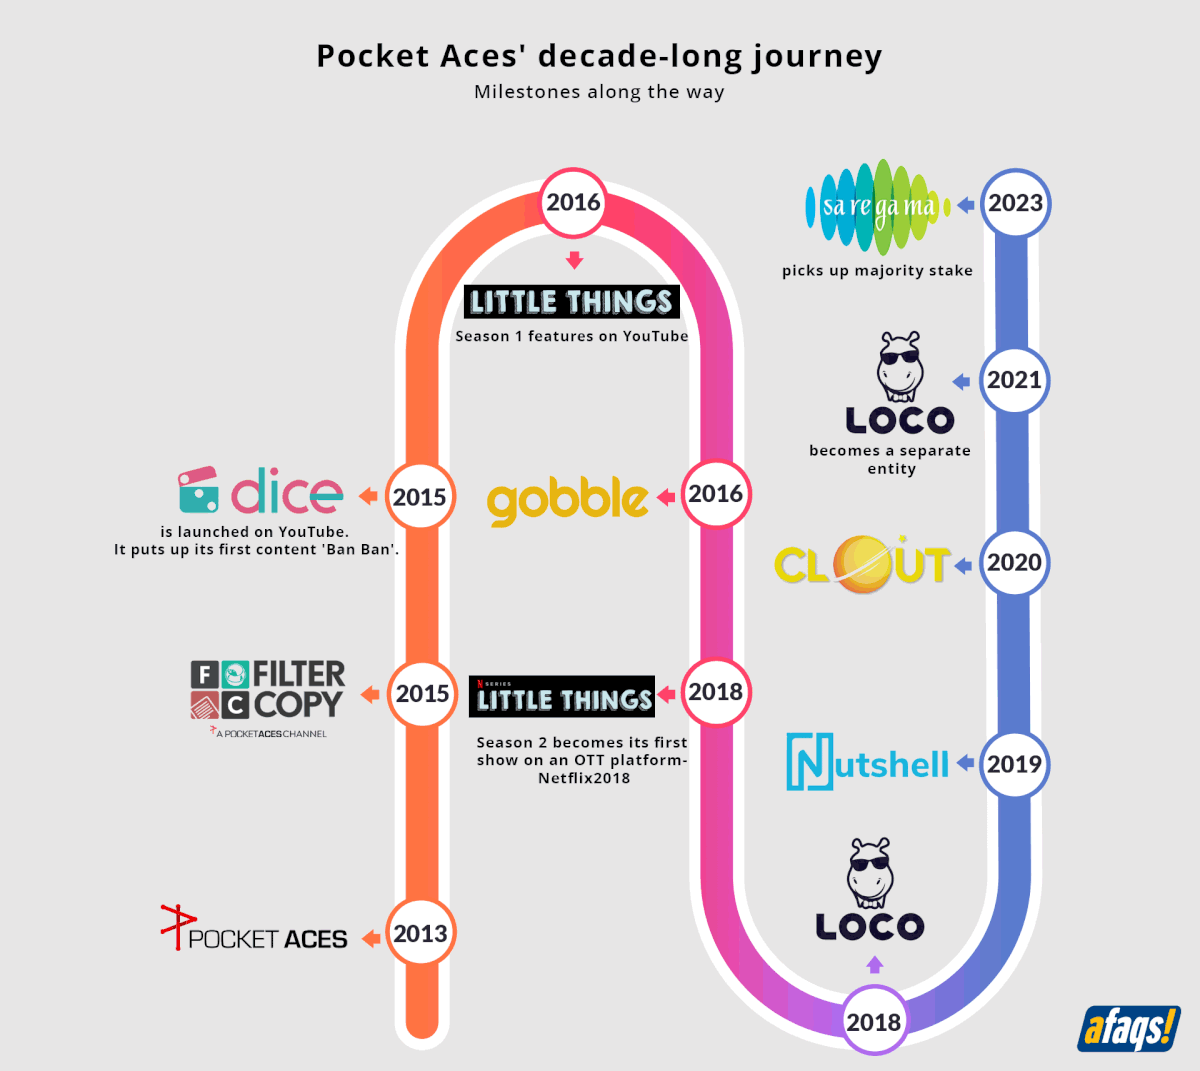 Pocket Aces aspires to become a digital media conglomerate